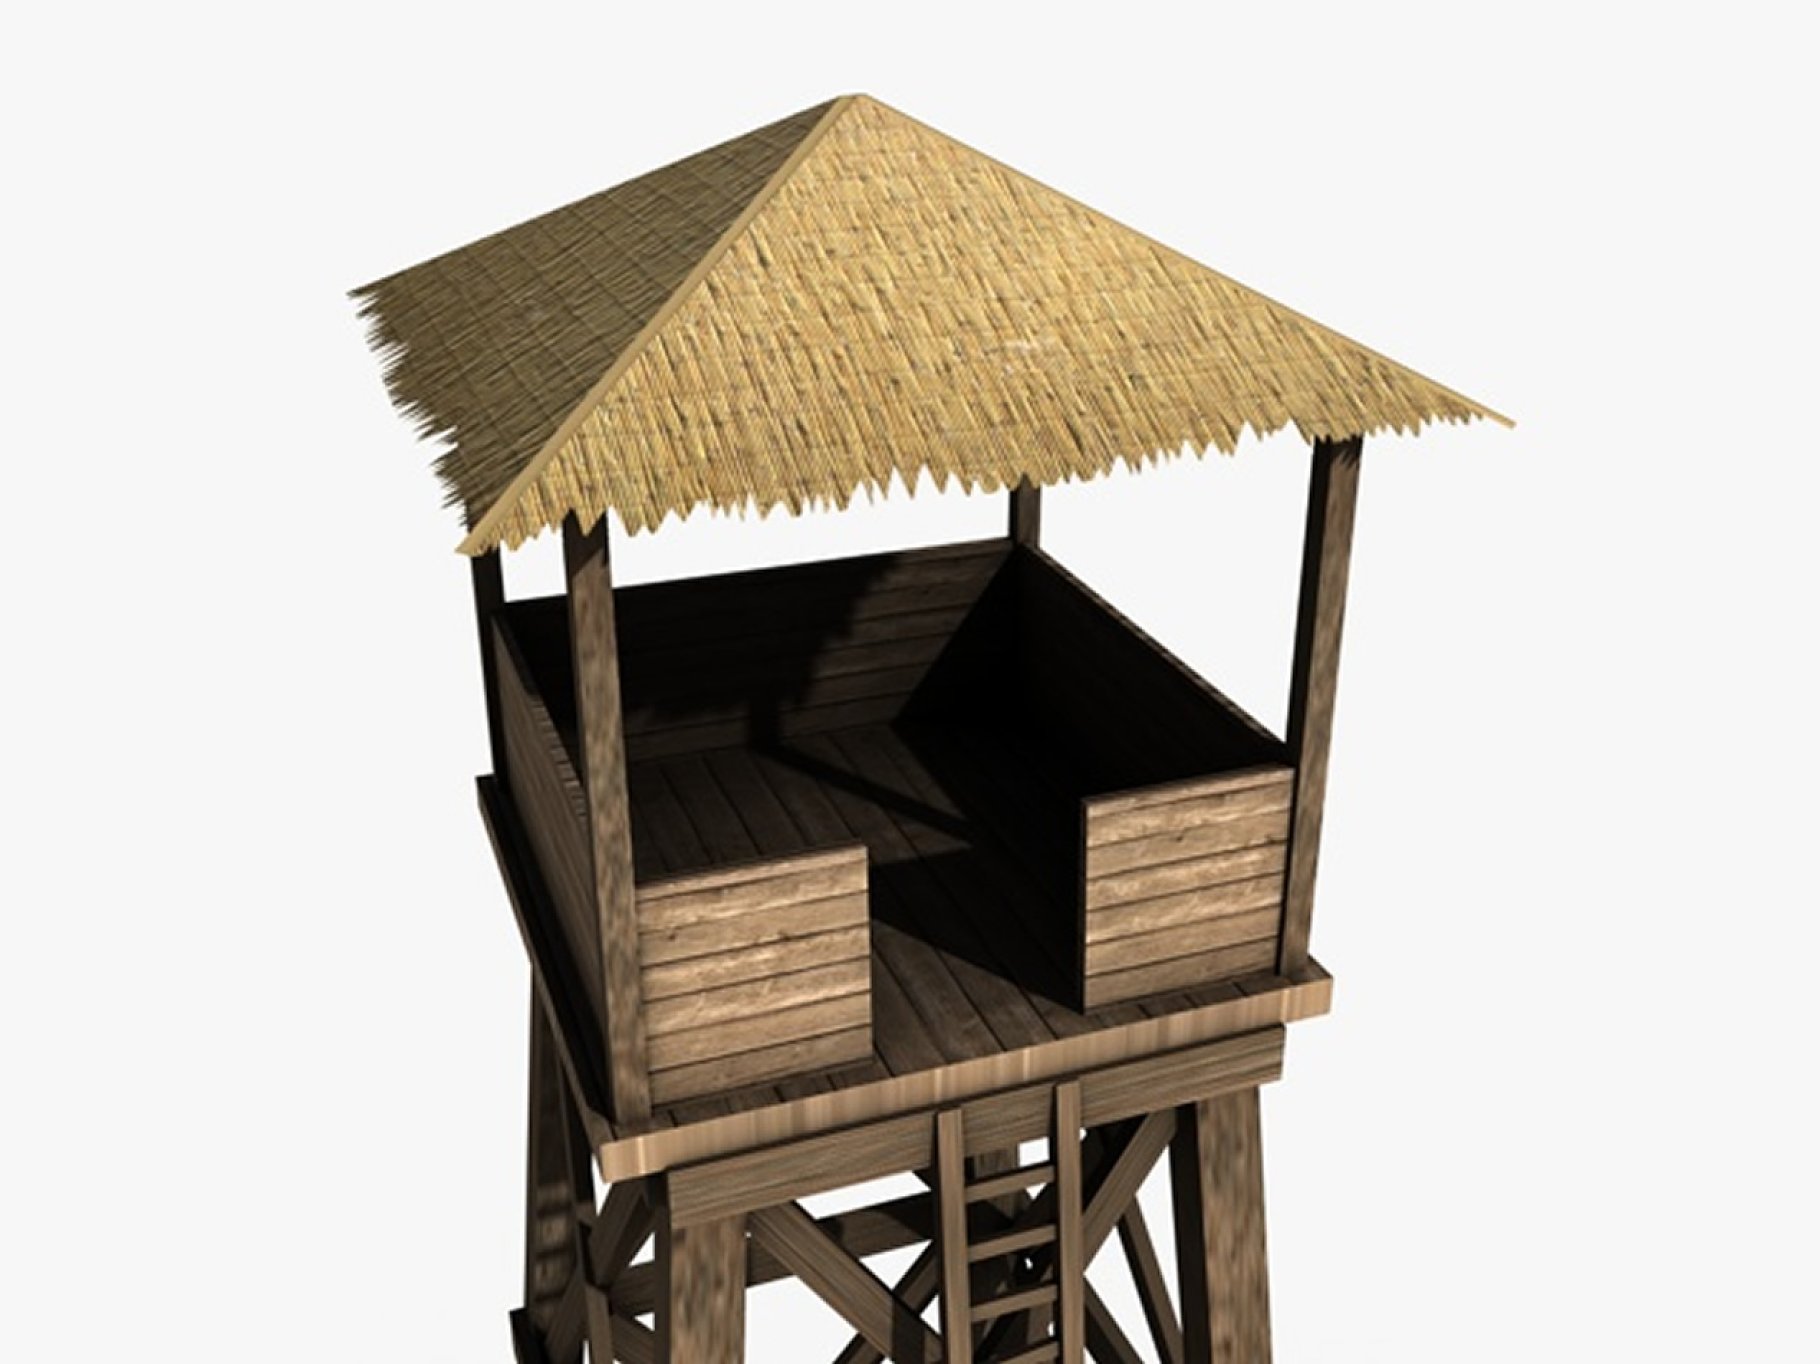 Close-up low poly watchtower mockup.